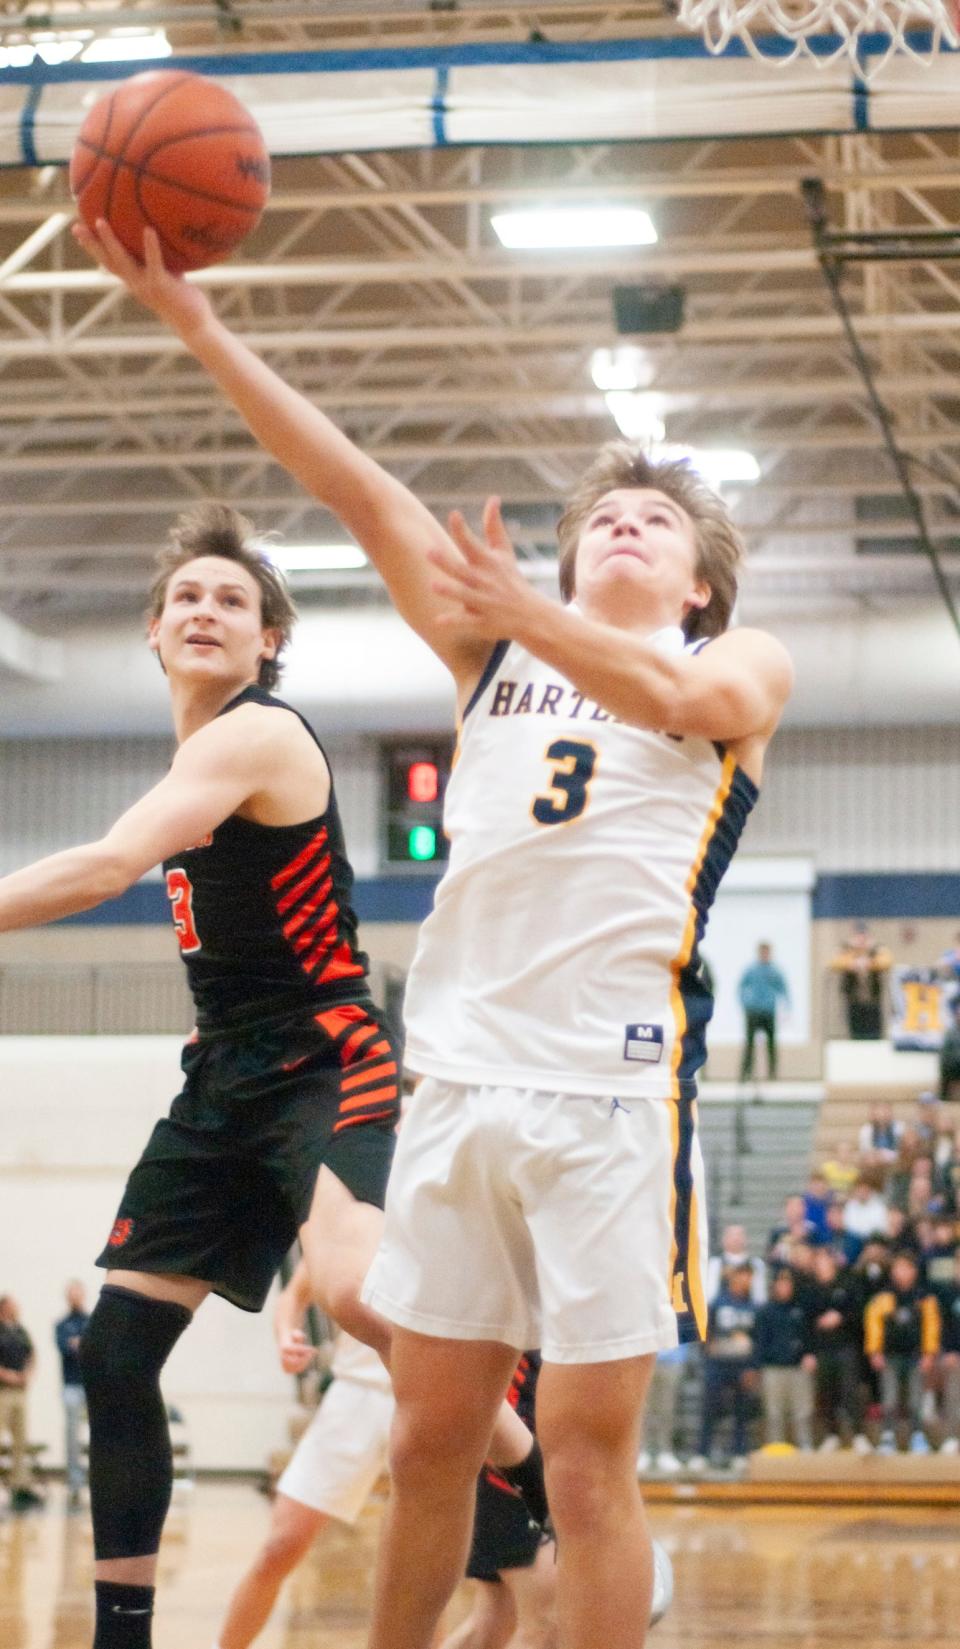 Ryan Bohlen (3) hit a free throw with eight seconds left to give Hartland a 49-48 victory over Northville.